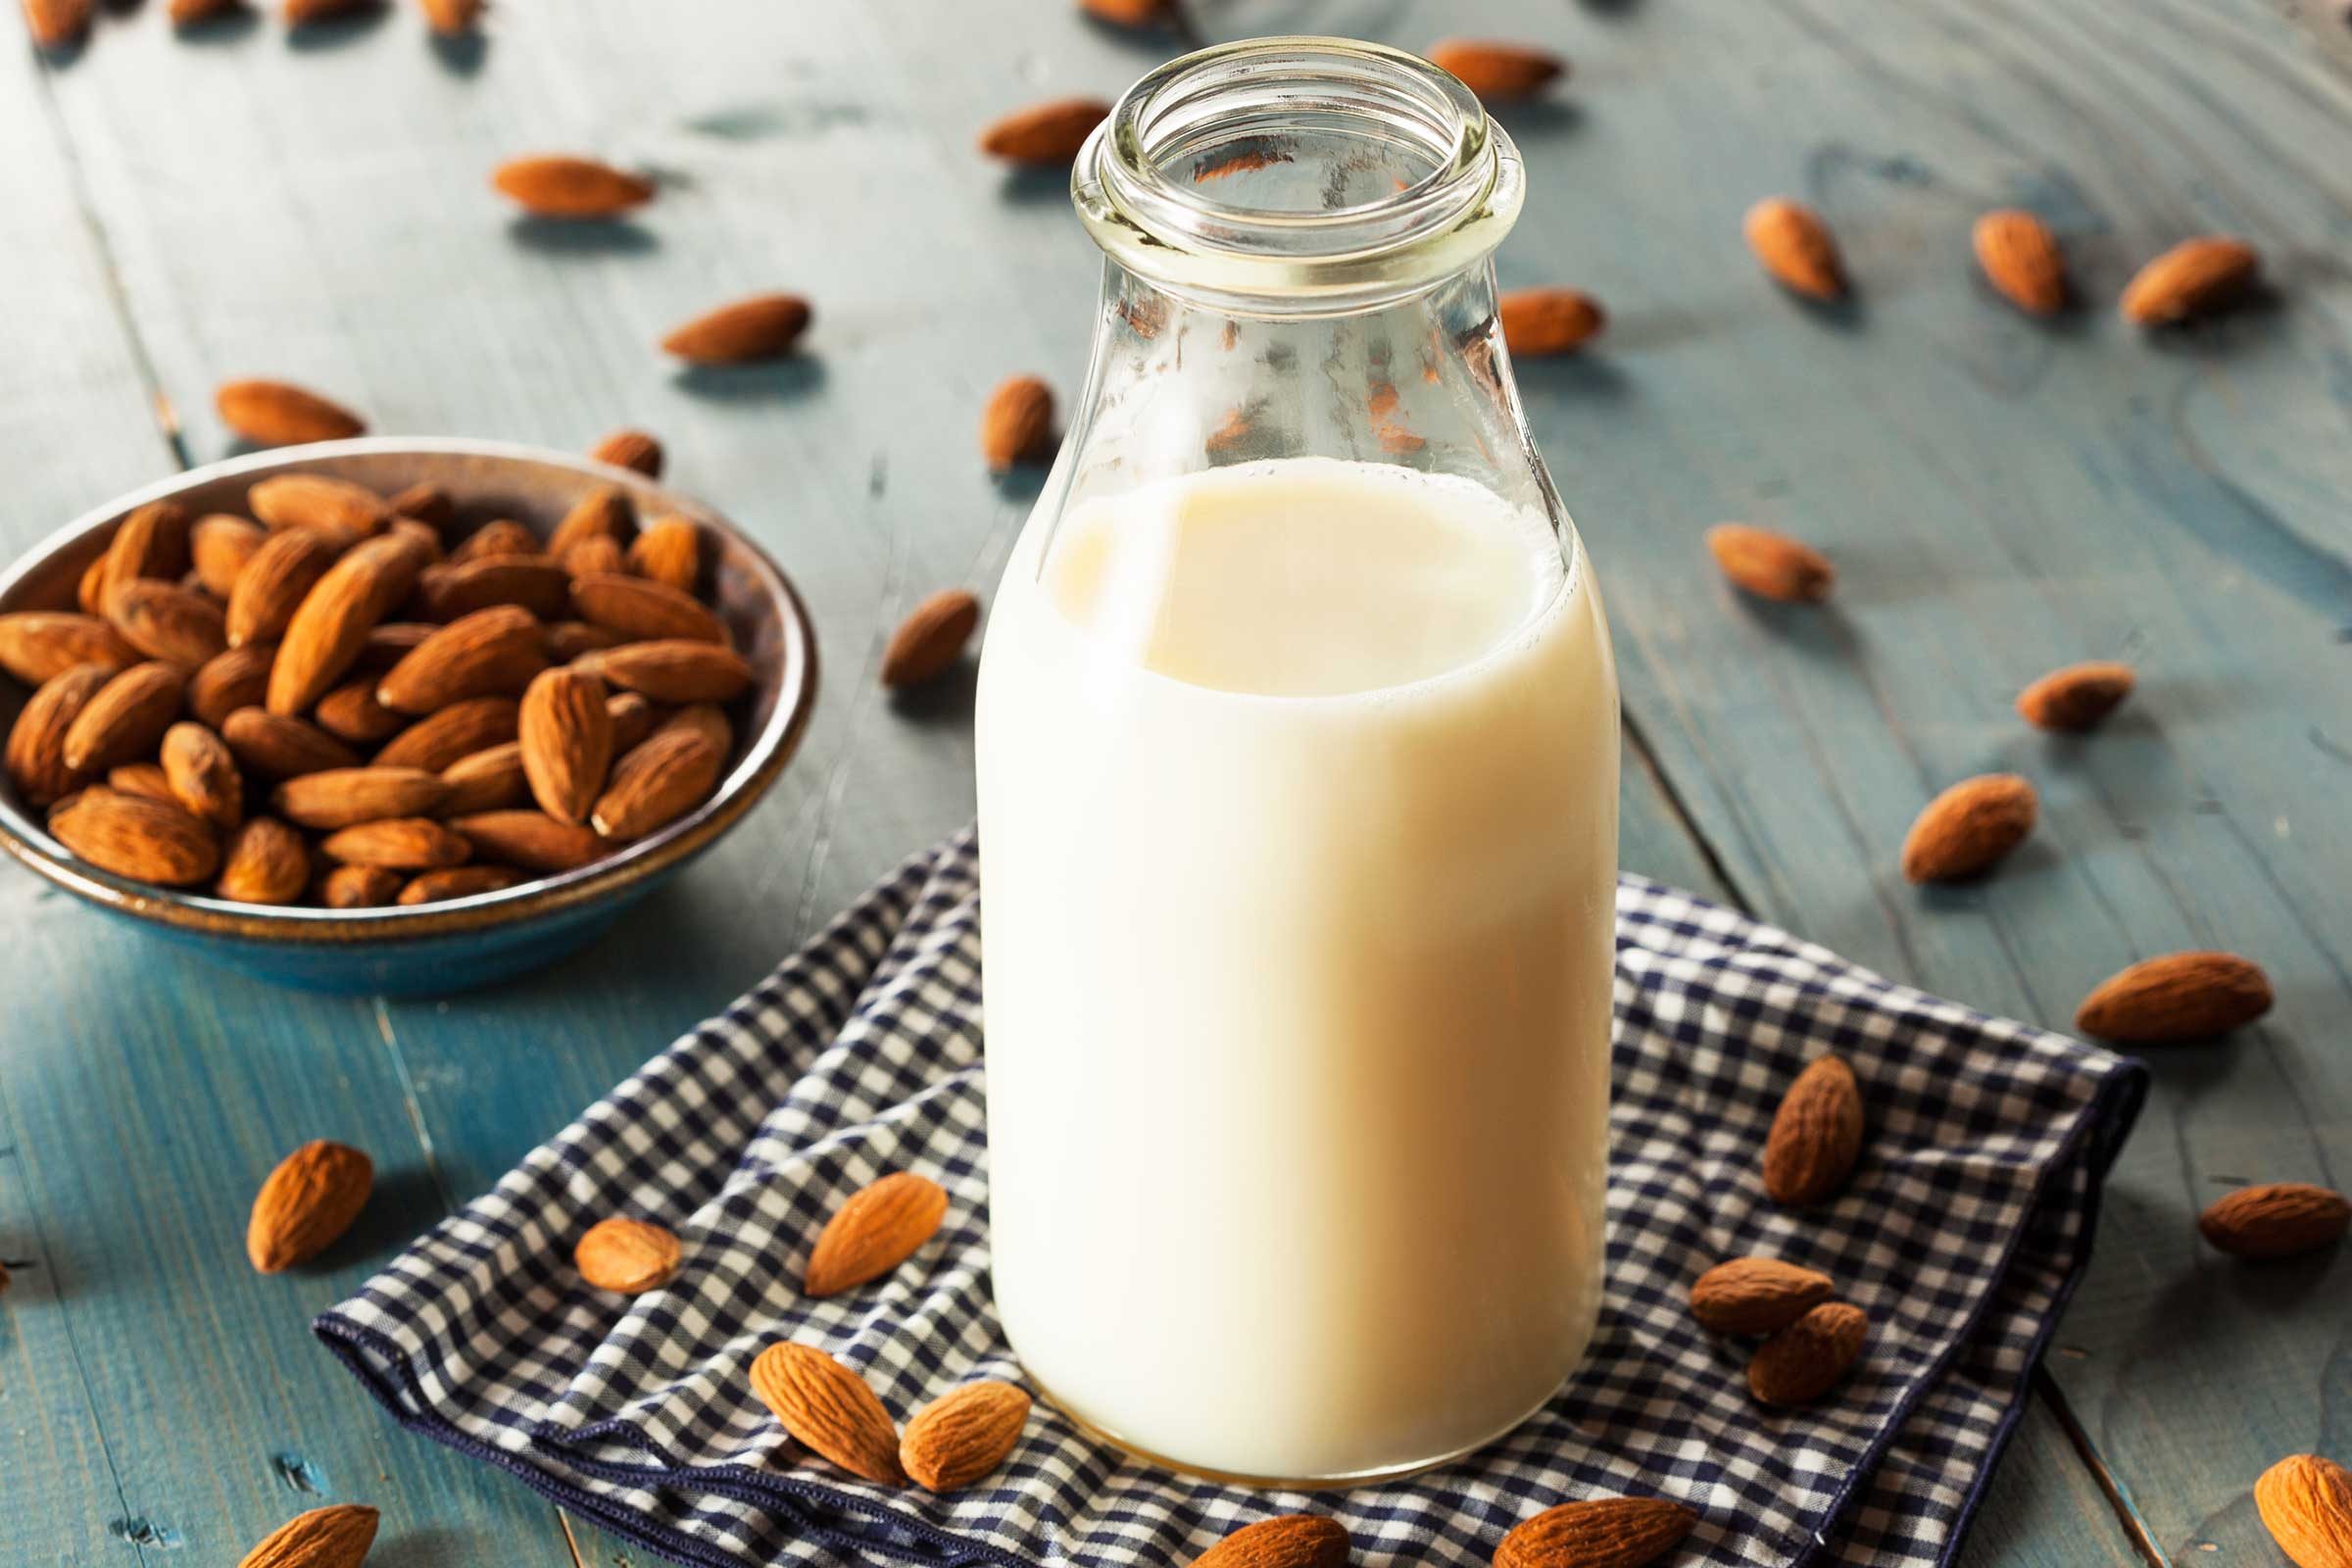 7 Things That Happen When You Go on a Dairy-Free Diet